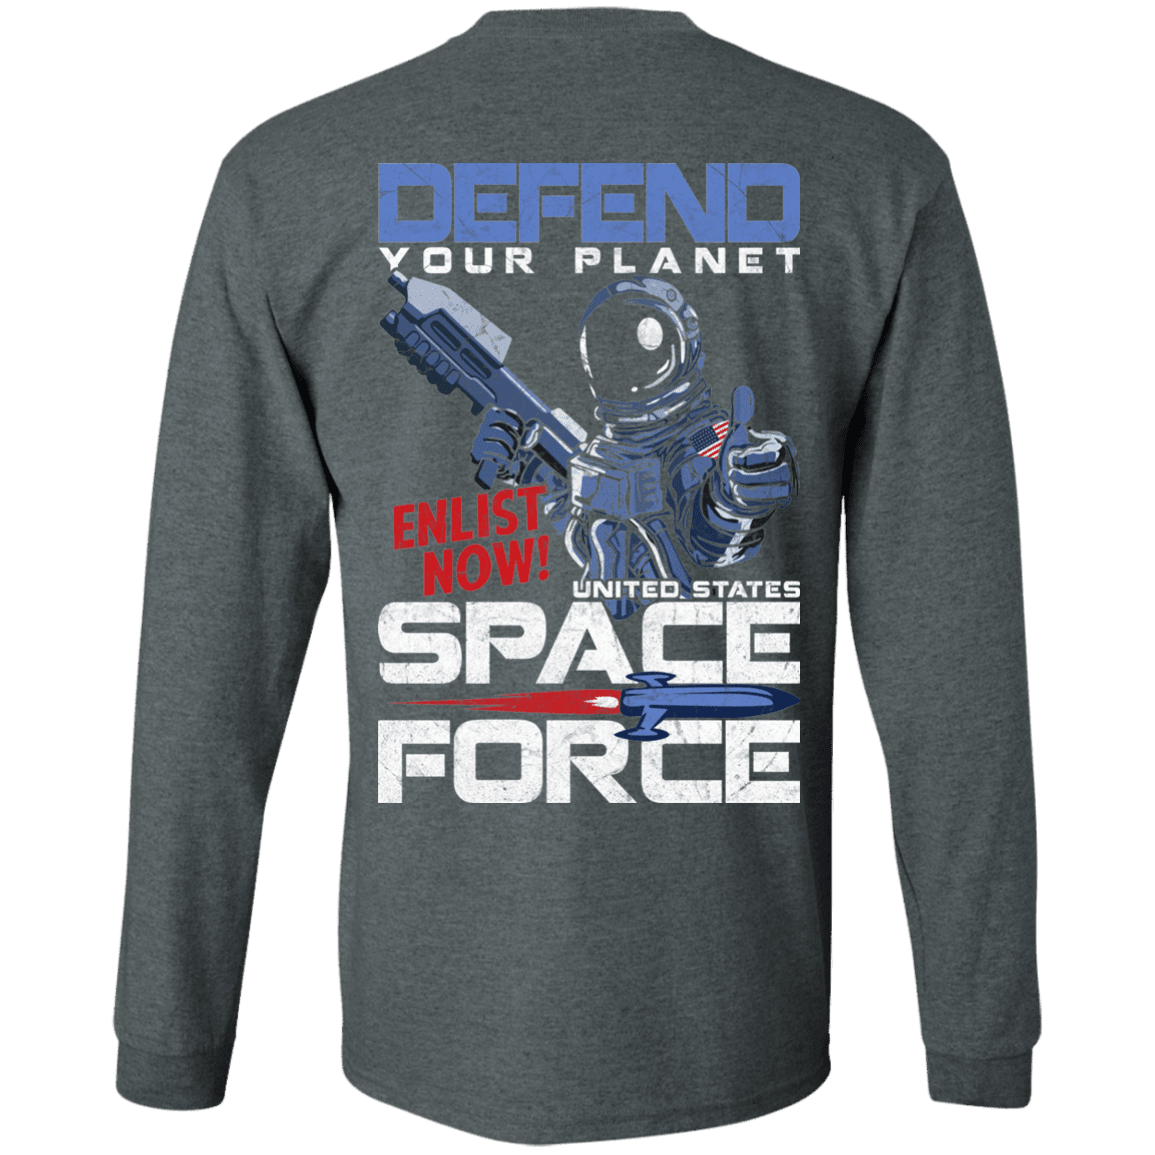 Military T-Shirt "Defend Your Planet Space Force" Men Back-TShirt-General-Veterans Nation